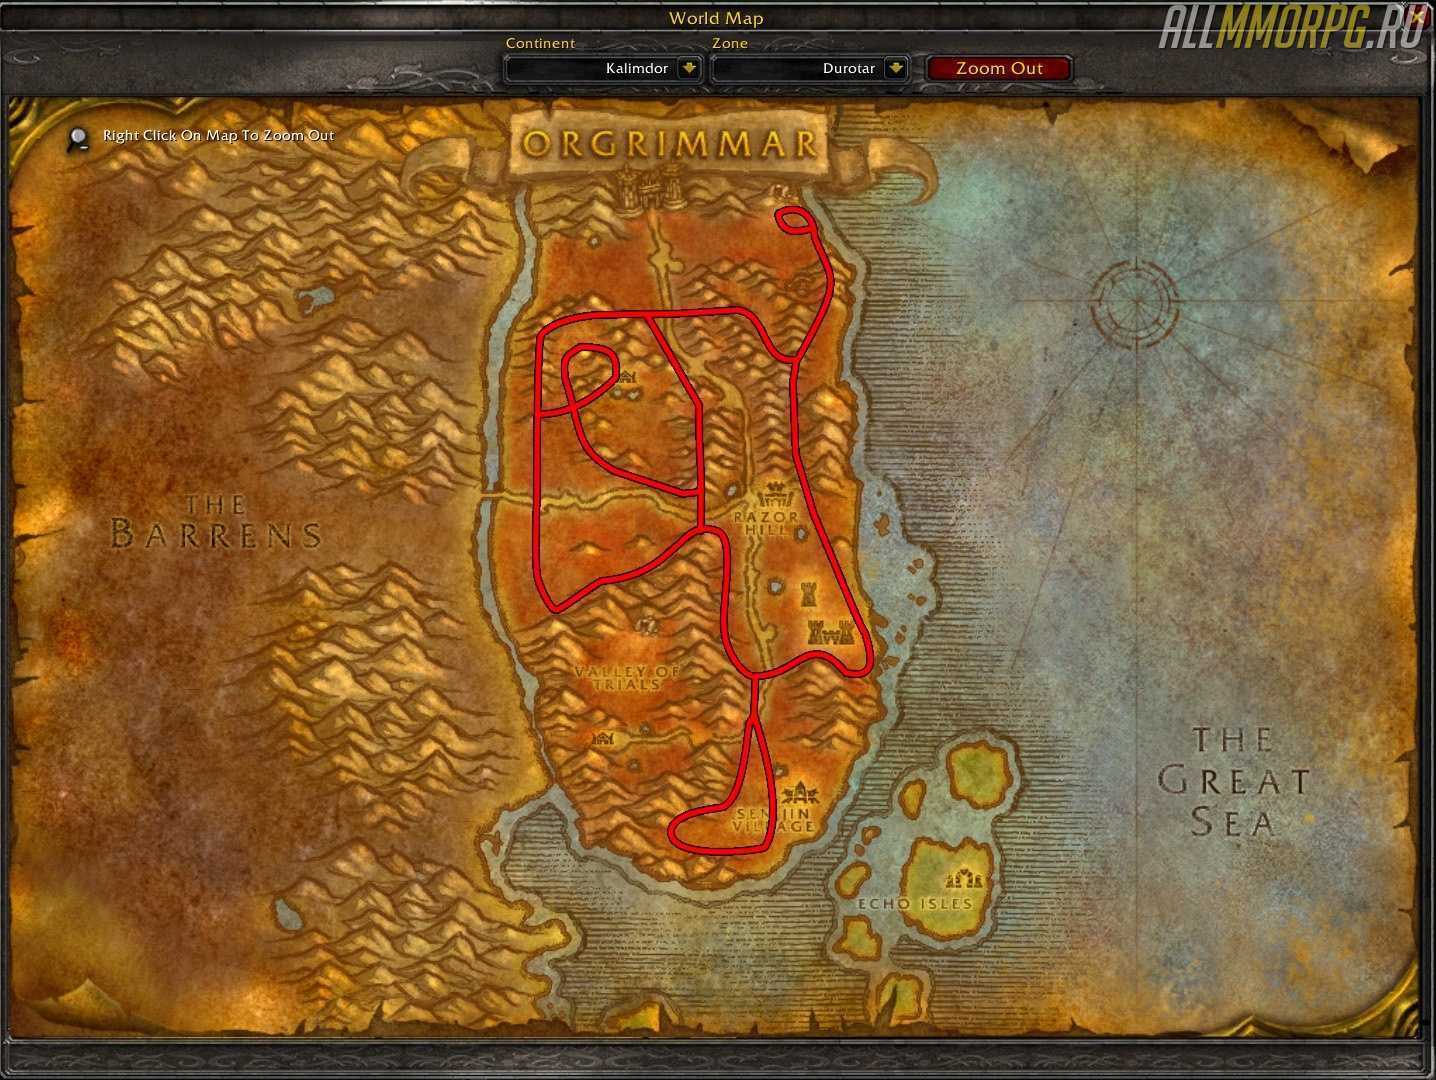 Wotlk classic mining leveling guide 1-450 - wow-professions